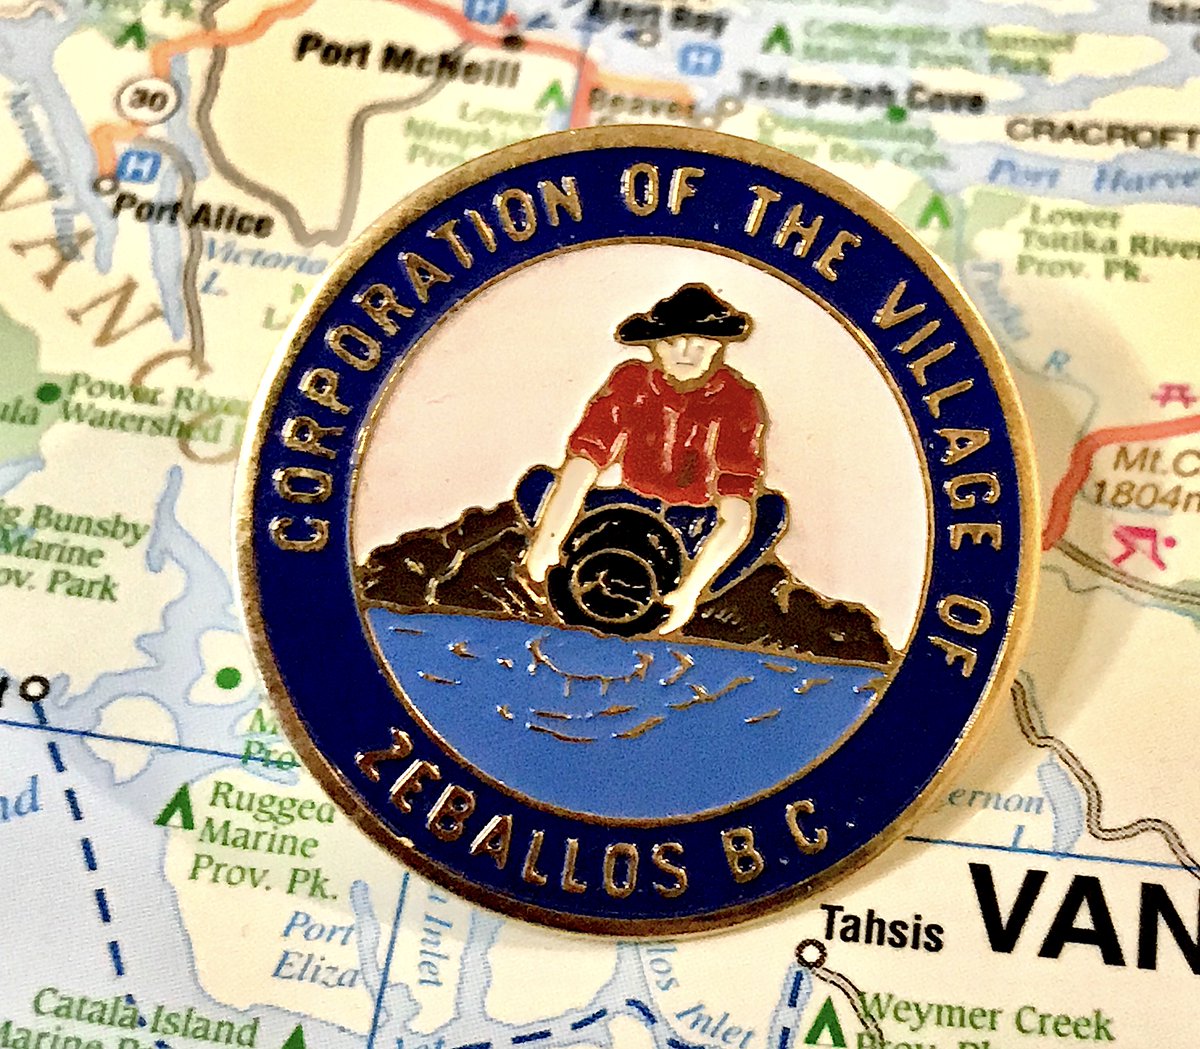 63. ZEBALLOS- gold pan man loves his corporation of the village- the balance on this pin is pretty good- yes, I have a Barkerville pin, but it's not a municipality so I'm not showing it as part of this